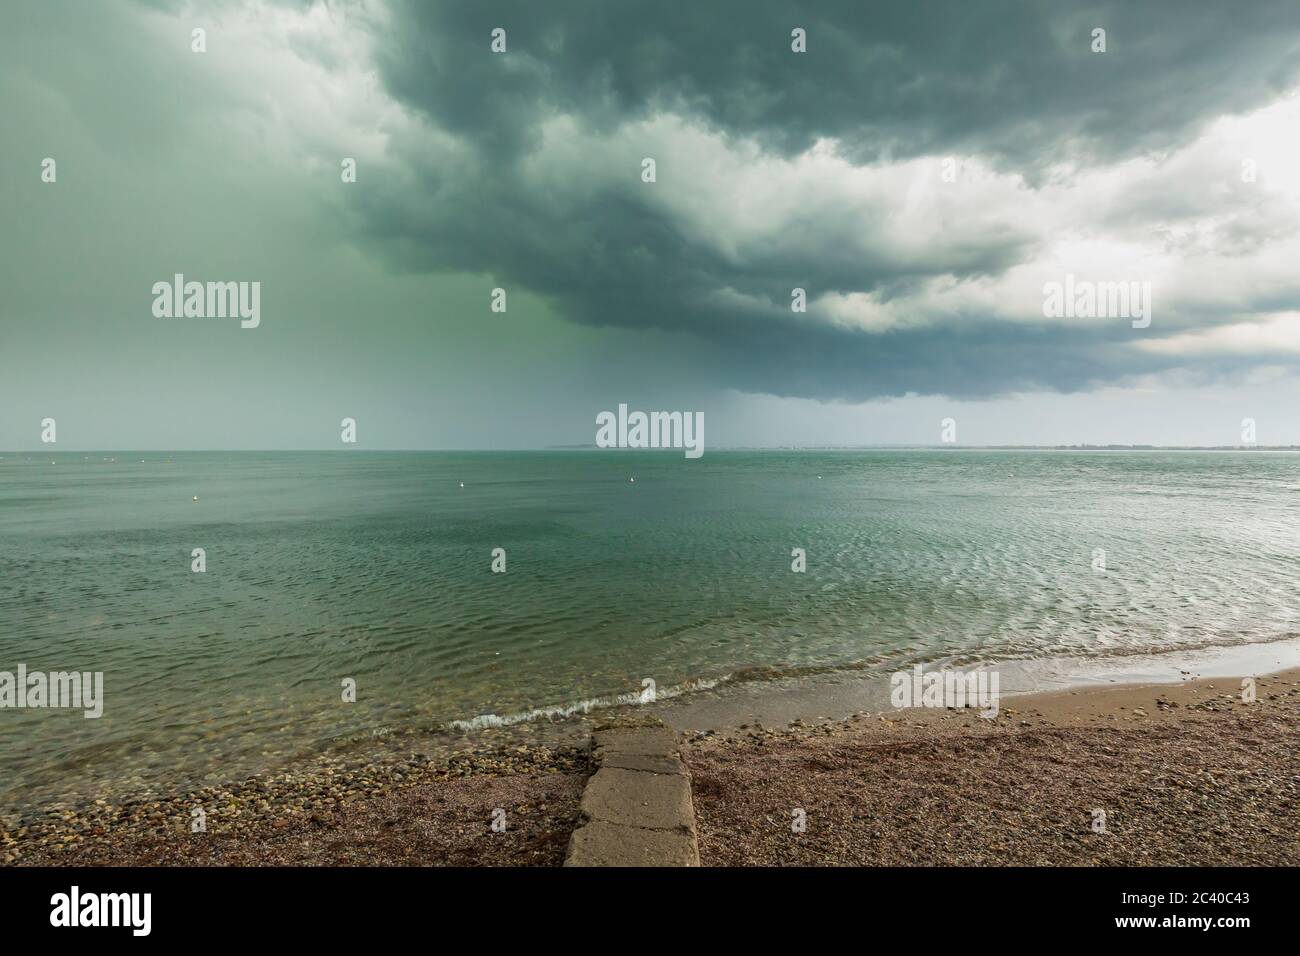 Severe weather with thunderstorms, heavy rain showers and strong winds develop rapidly at Desenzano del Garda city, lake Garda, Brescia, Lombardy, Ita Stock Photo